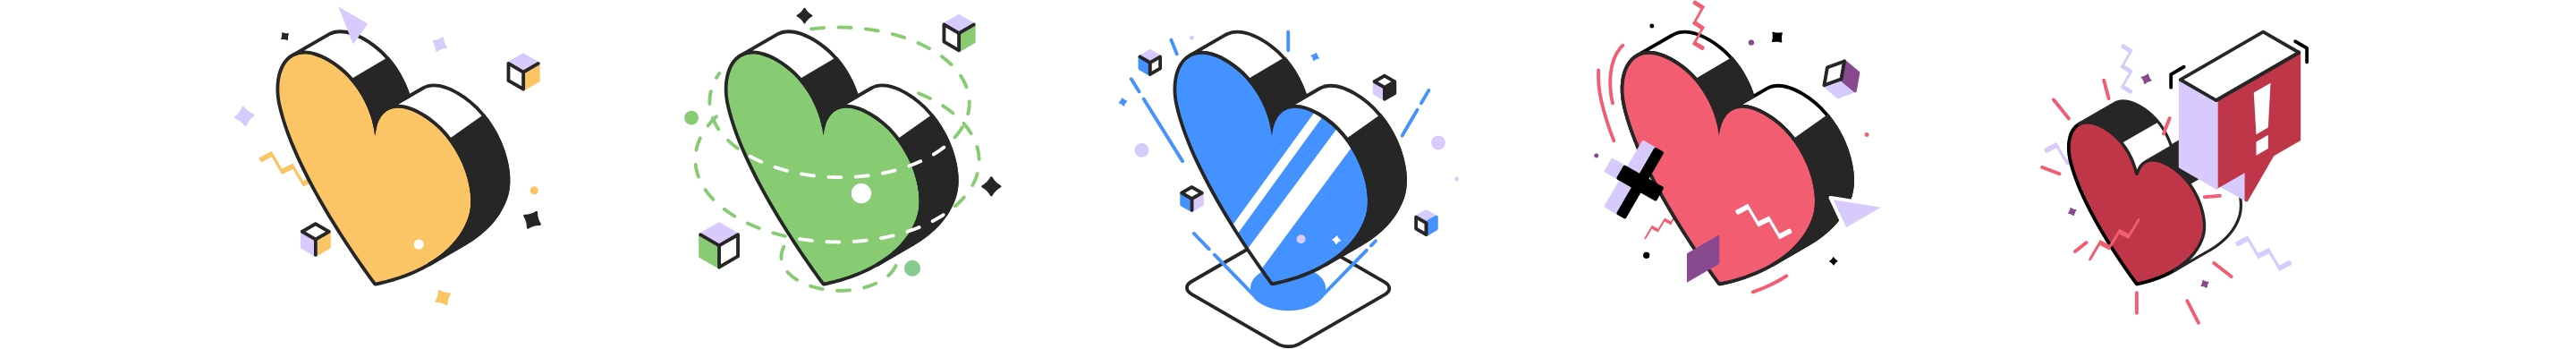 amicomed heart status icons